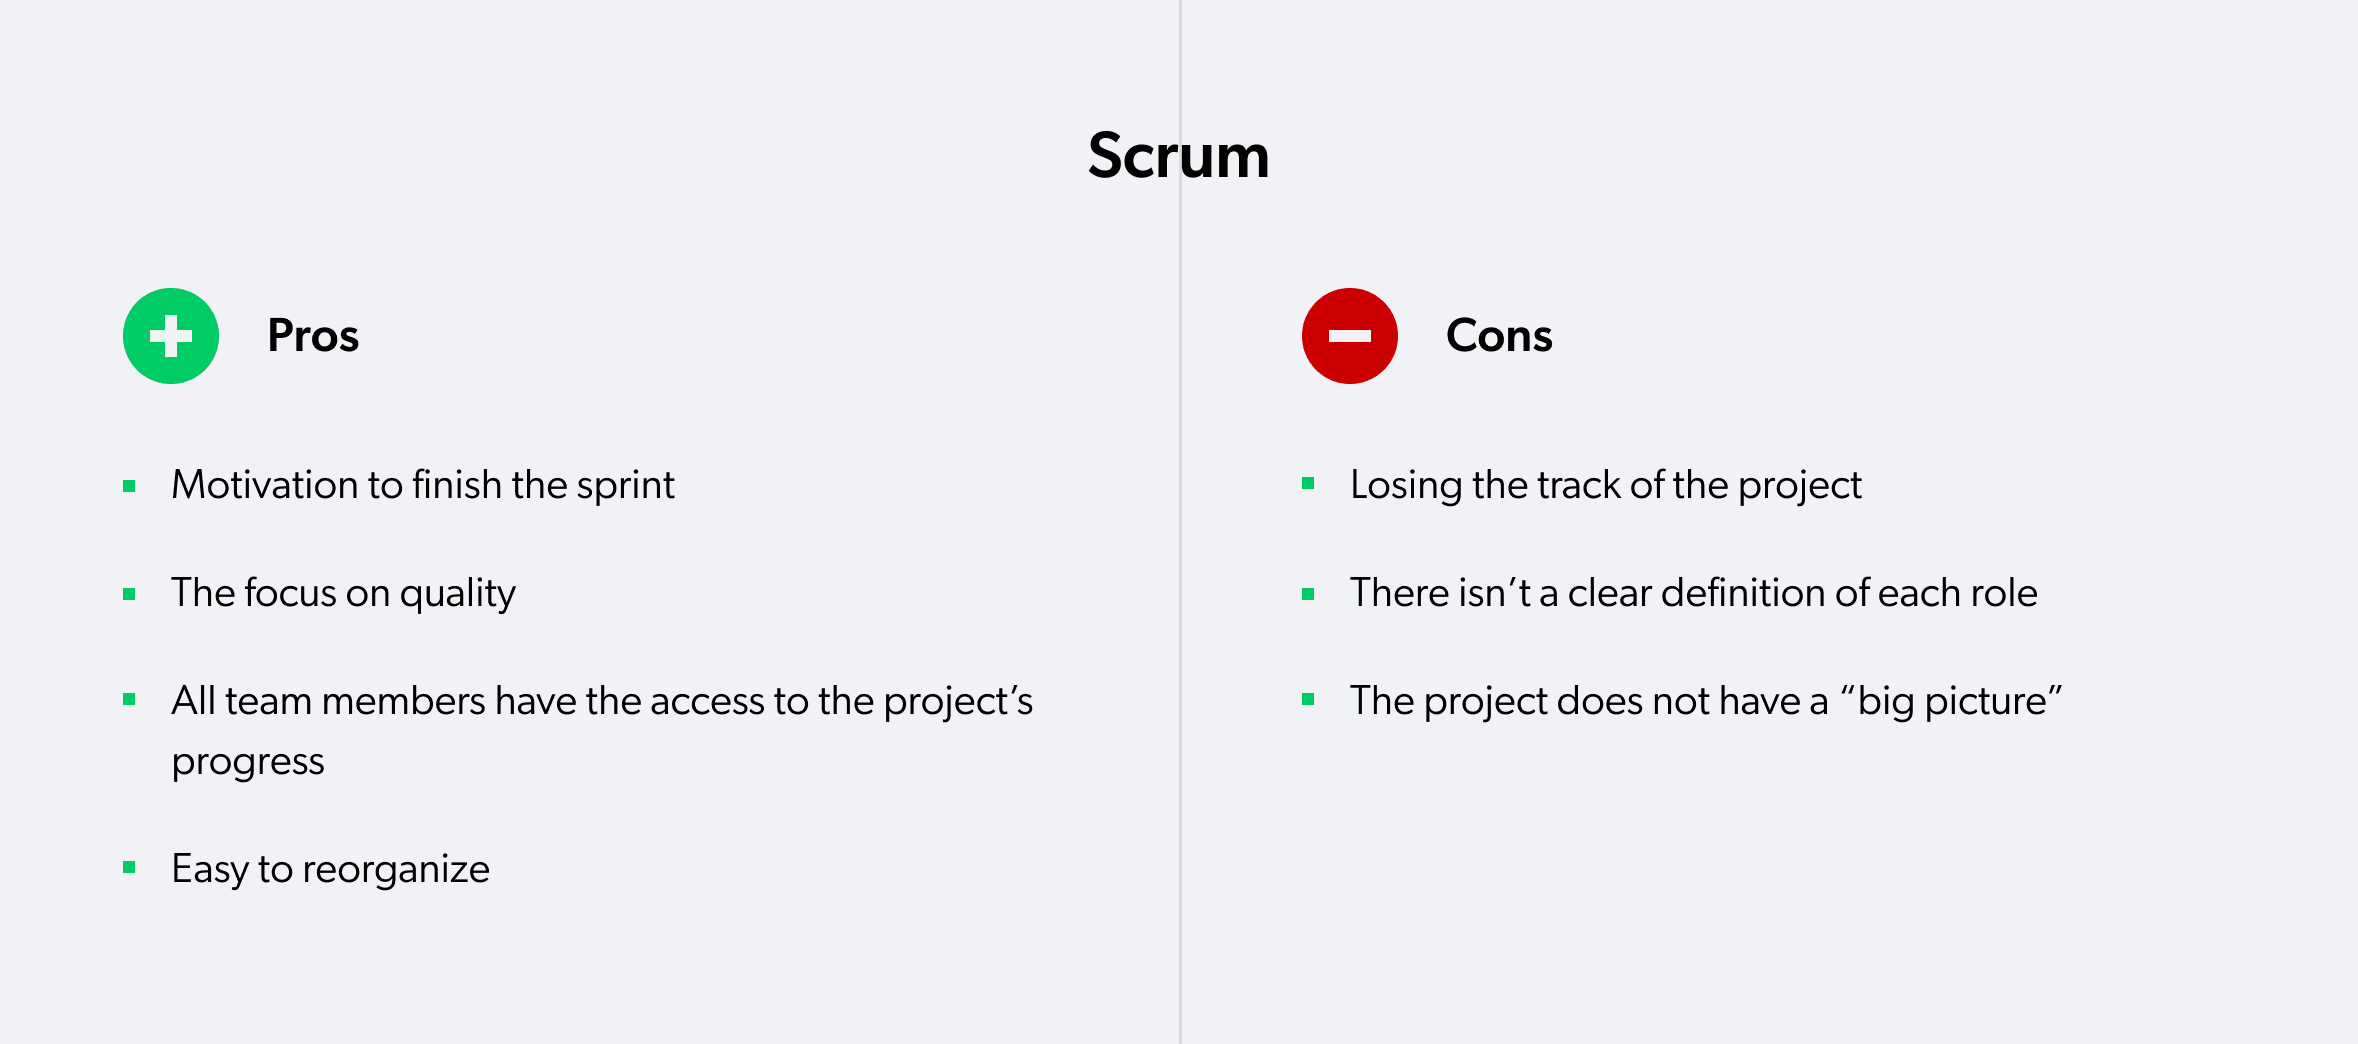 scrum pros and cons